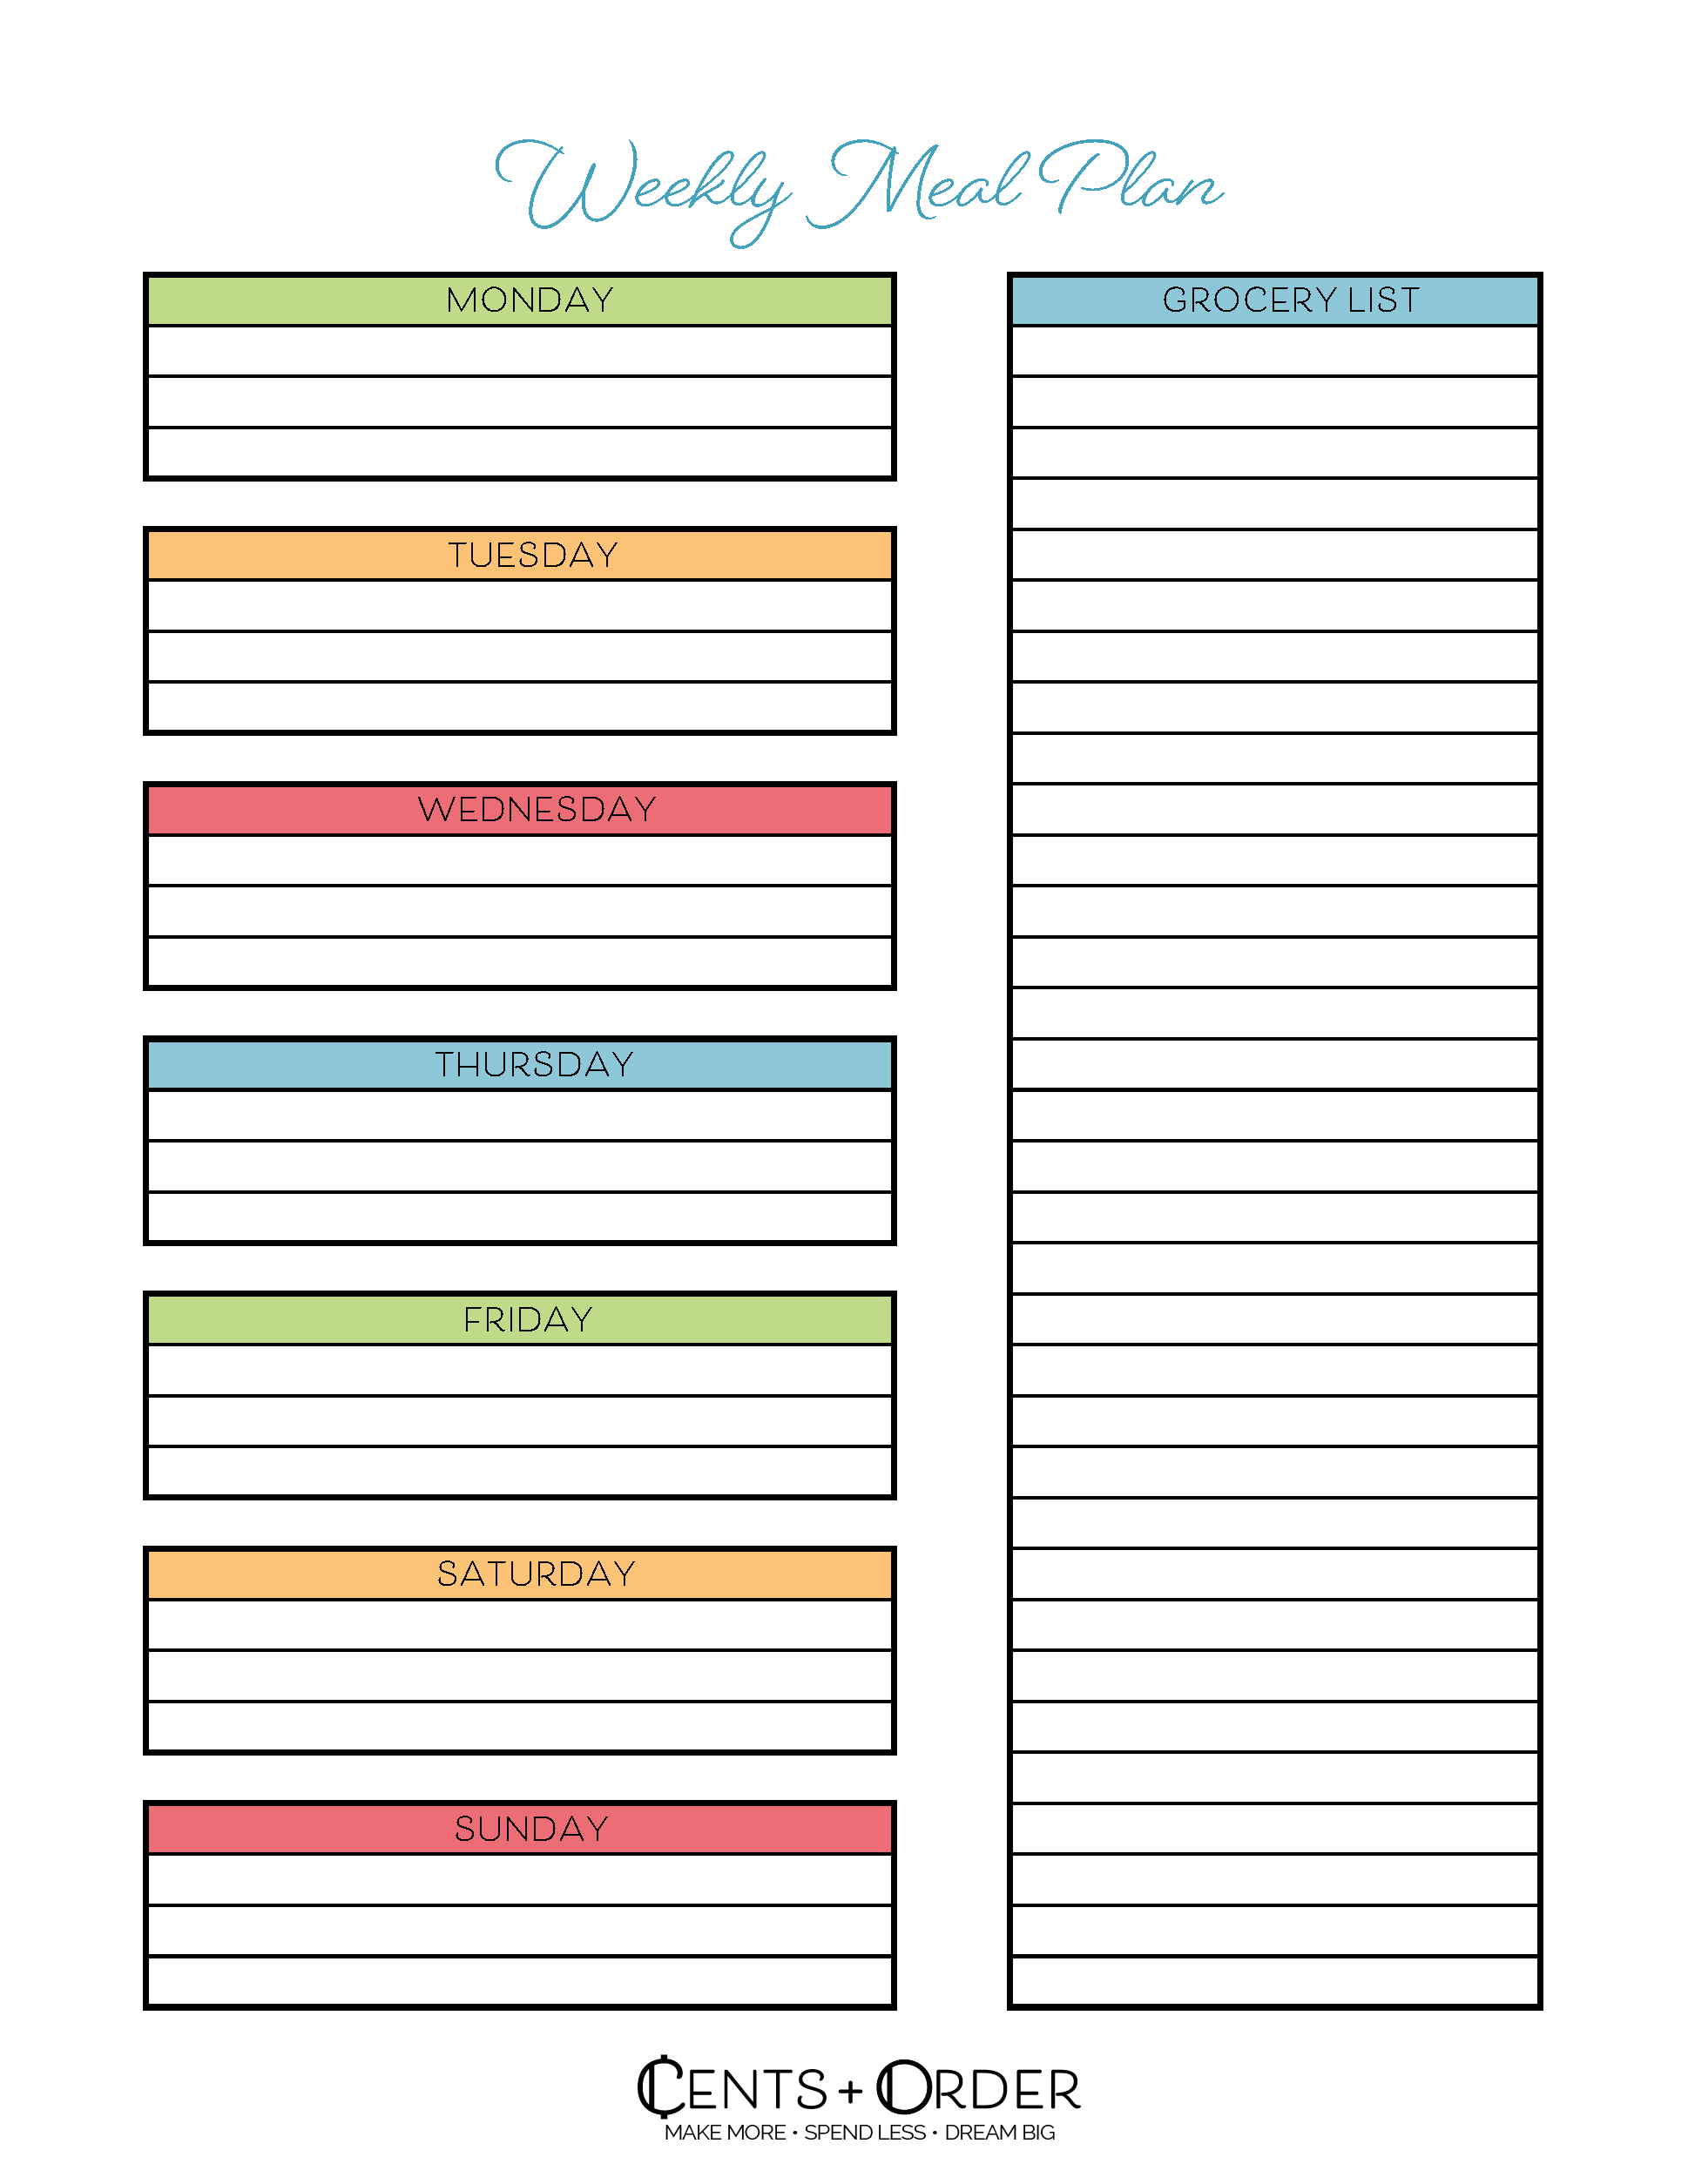 Weekly Meal Plan Template With Grocery List Collection